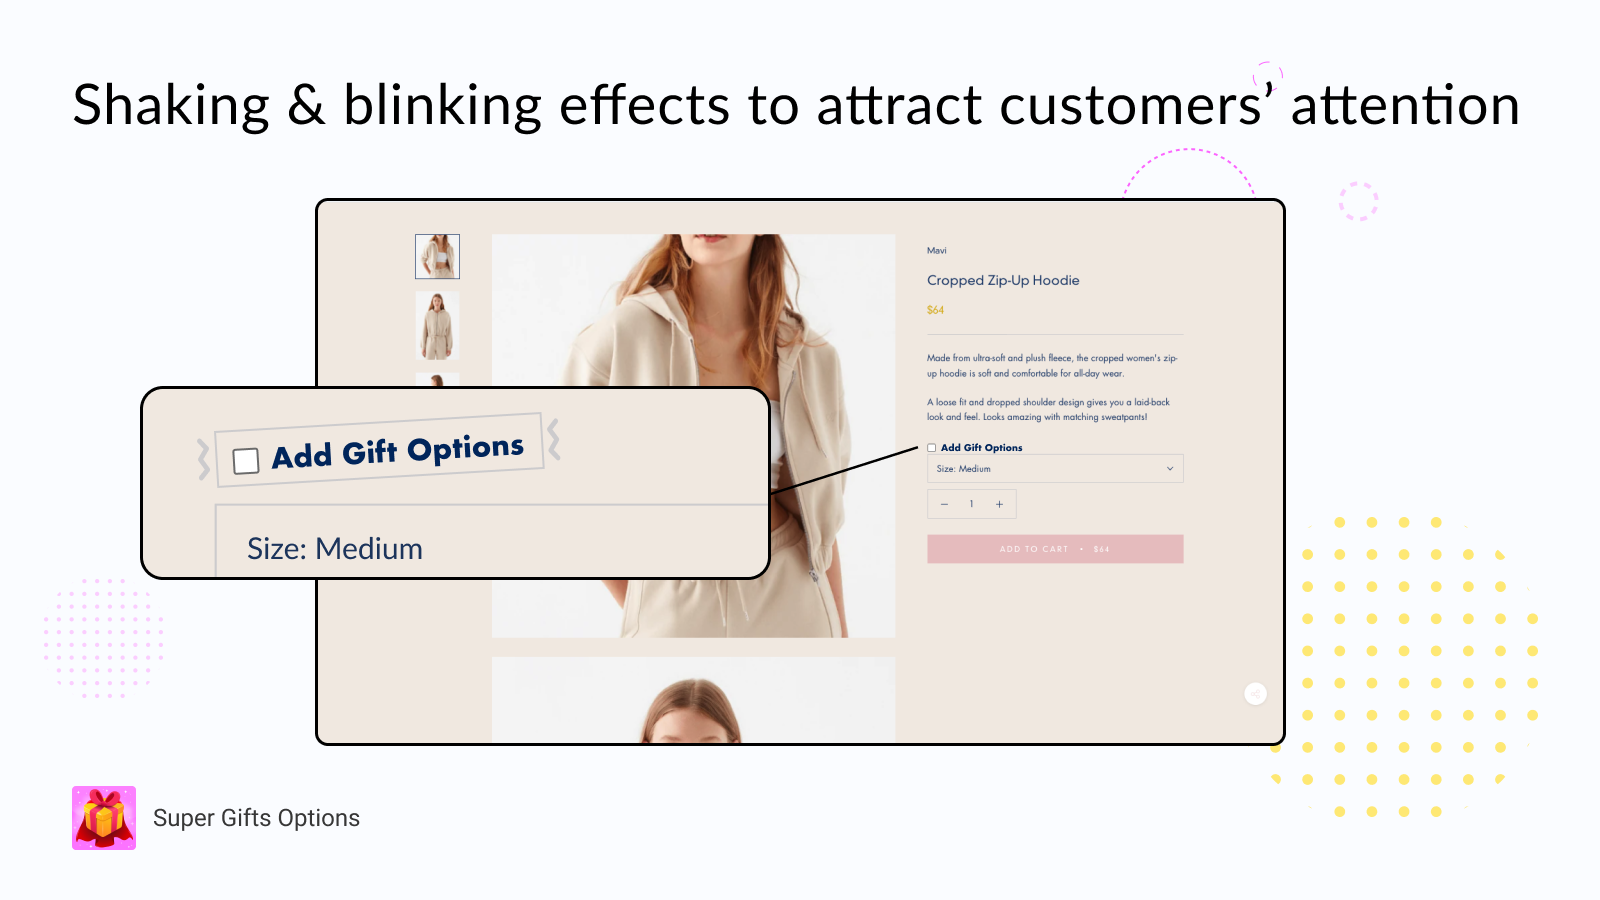 Attract visitors' attention to the gift options with animations